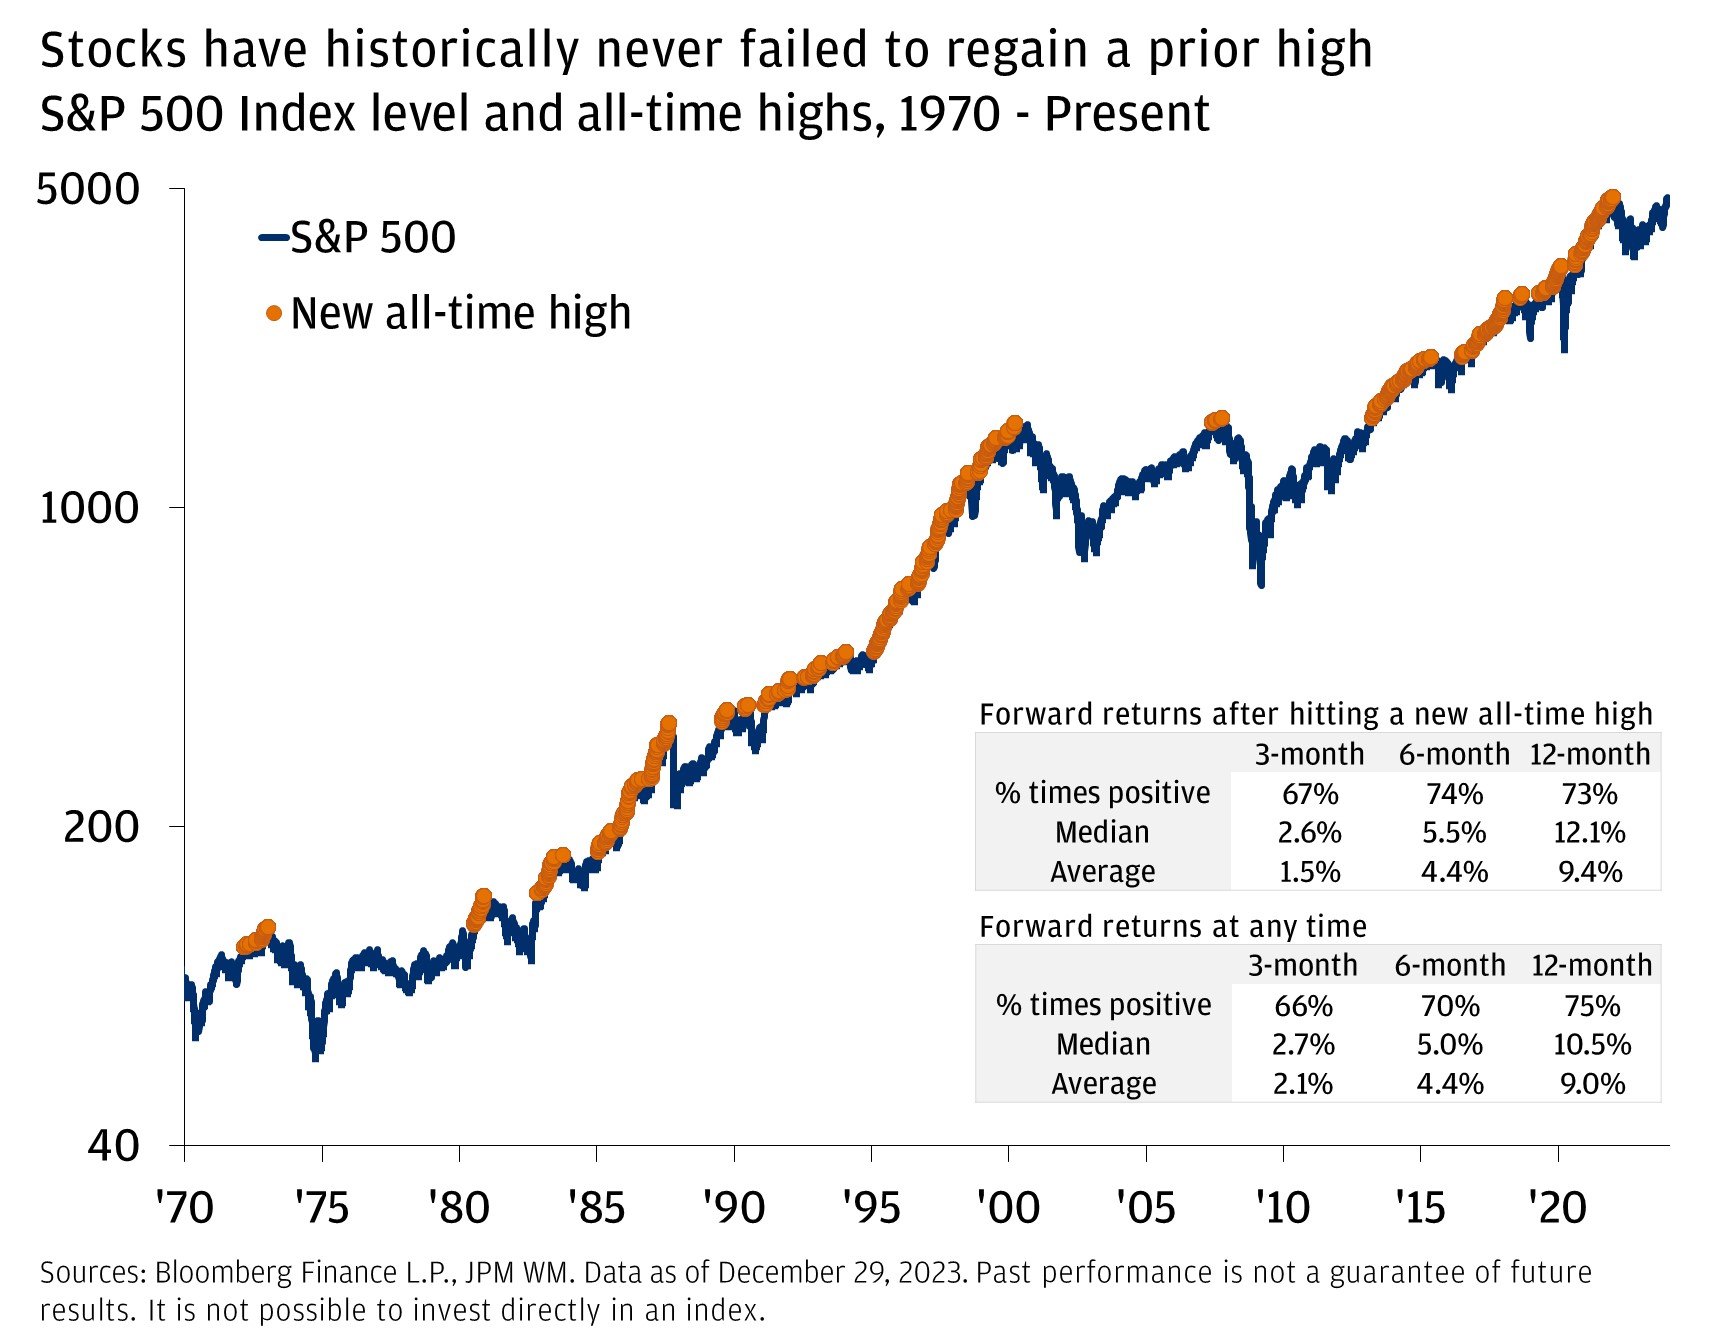 Stocks have historically never failed to regain a prior high